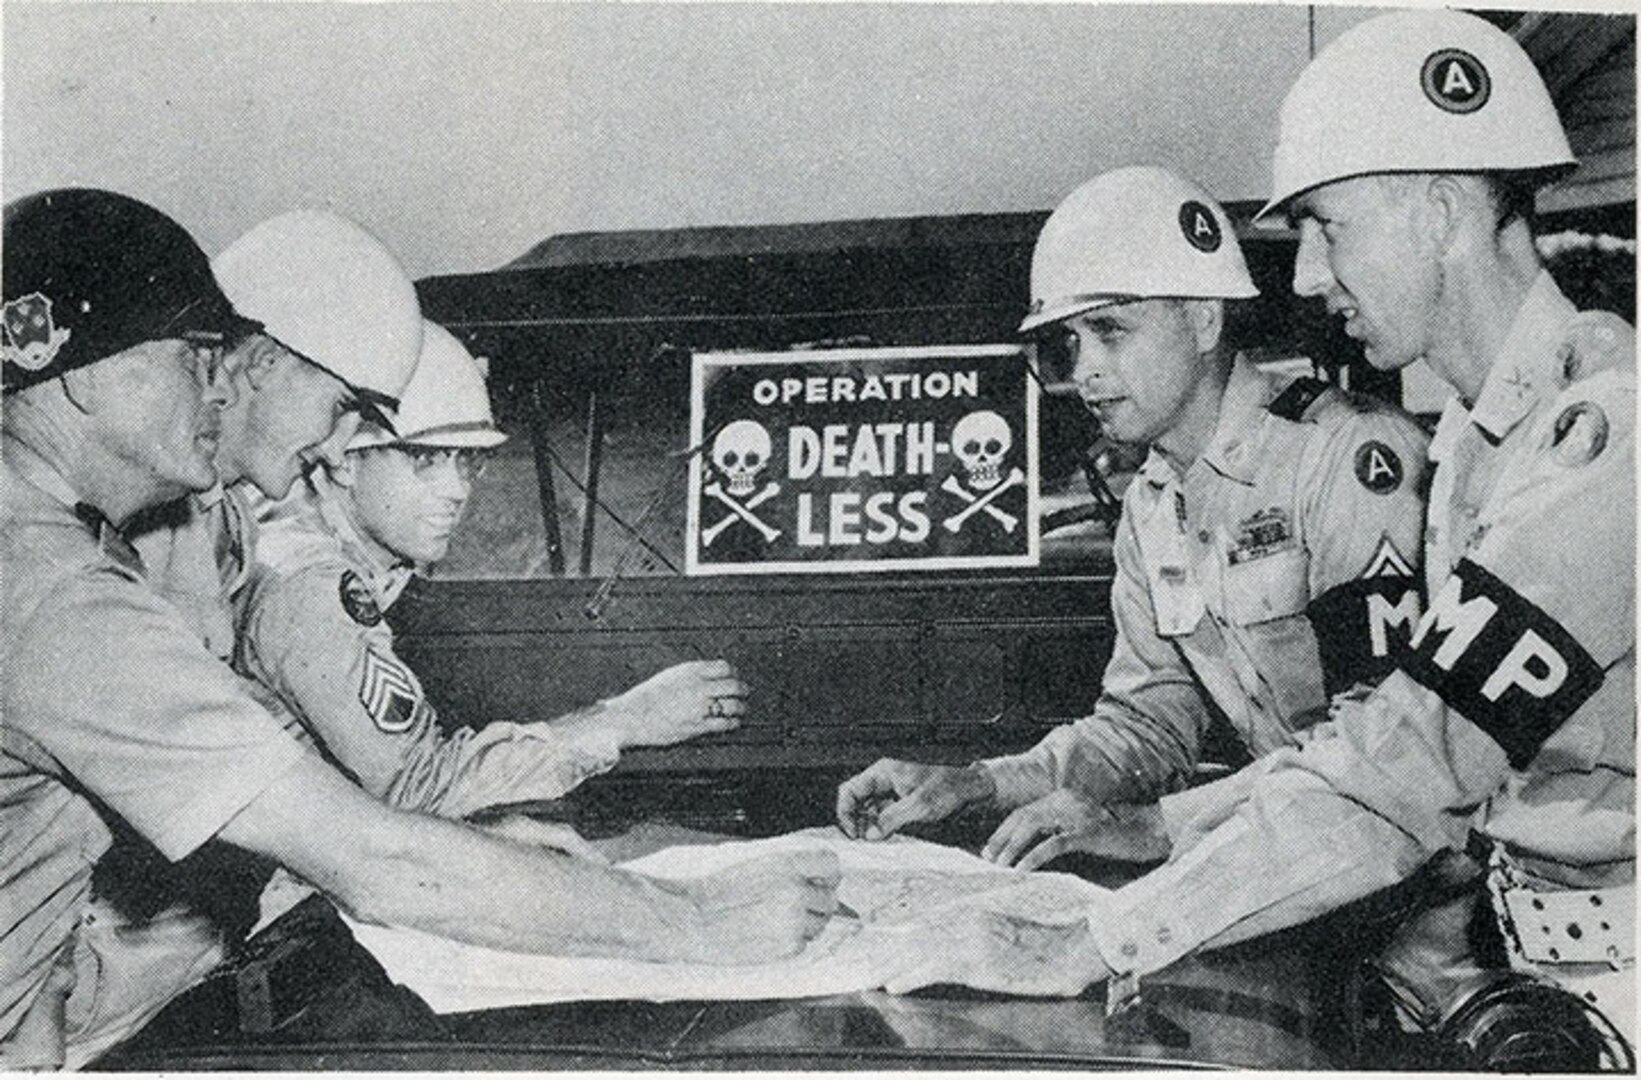 Georgia Army National Guard Lt. Col. John P. Wallis identifies a roadblock position on a map for Georgia Guard Soldiers of the Elberton-based 950th Antiaircraft Artillery Battalion.